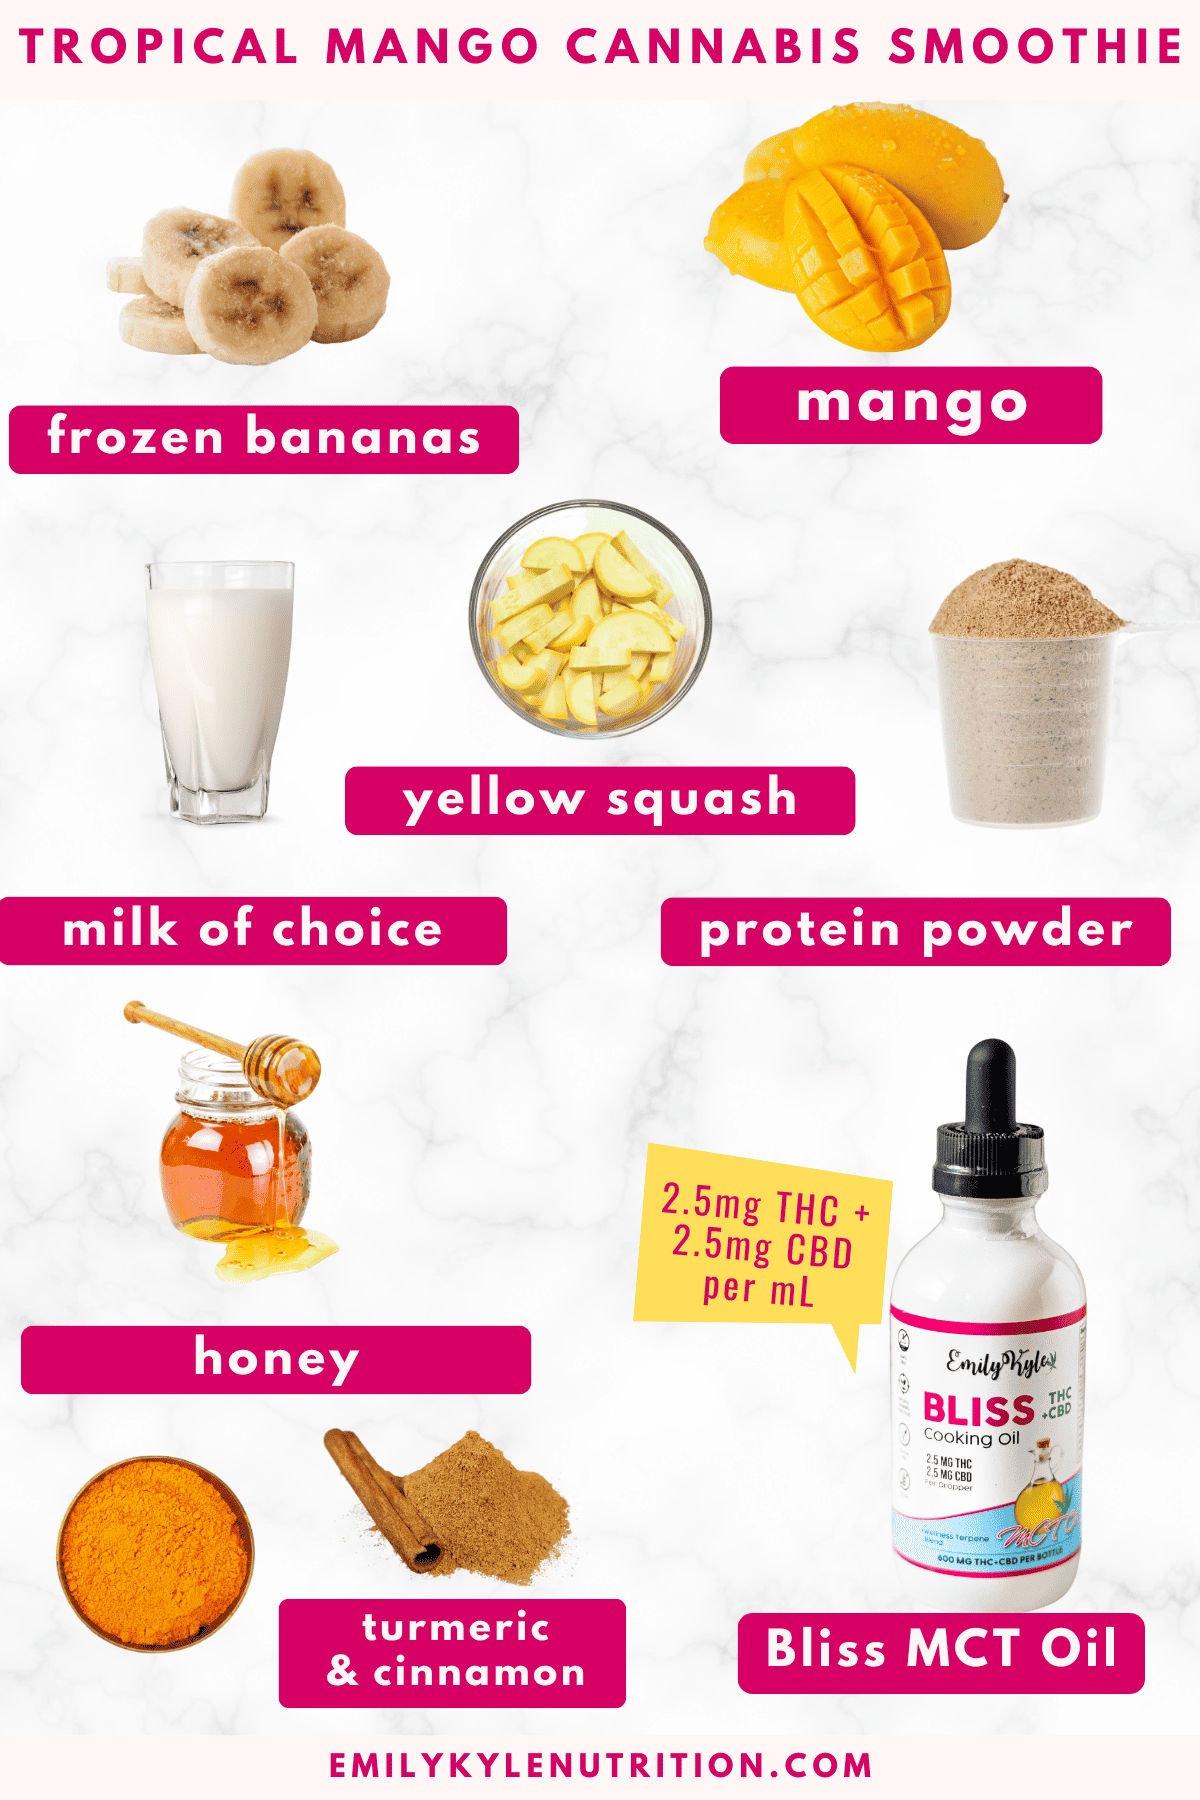 The ingredients needed to make a tropical cannabis smoothie.